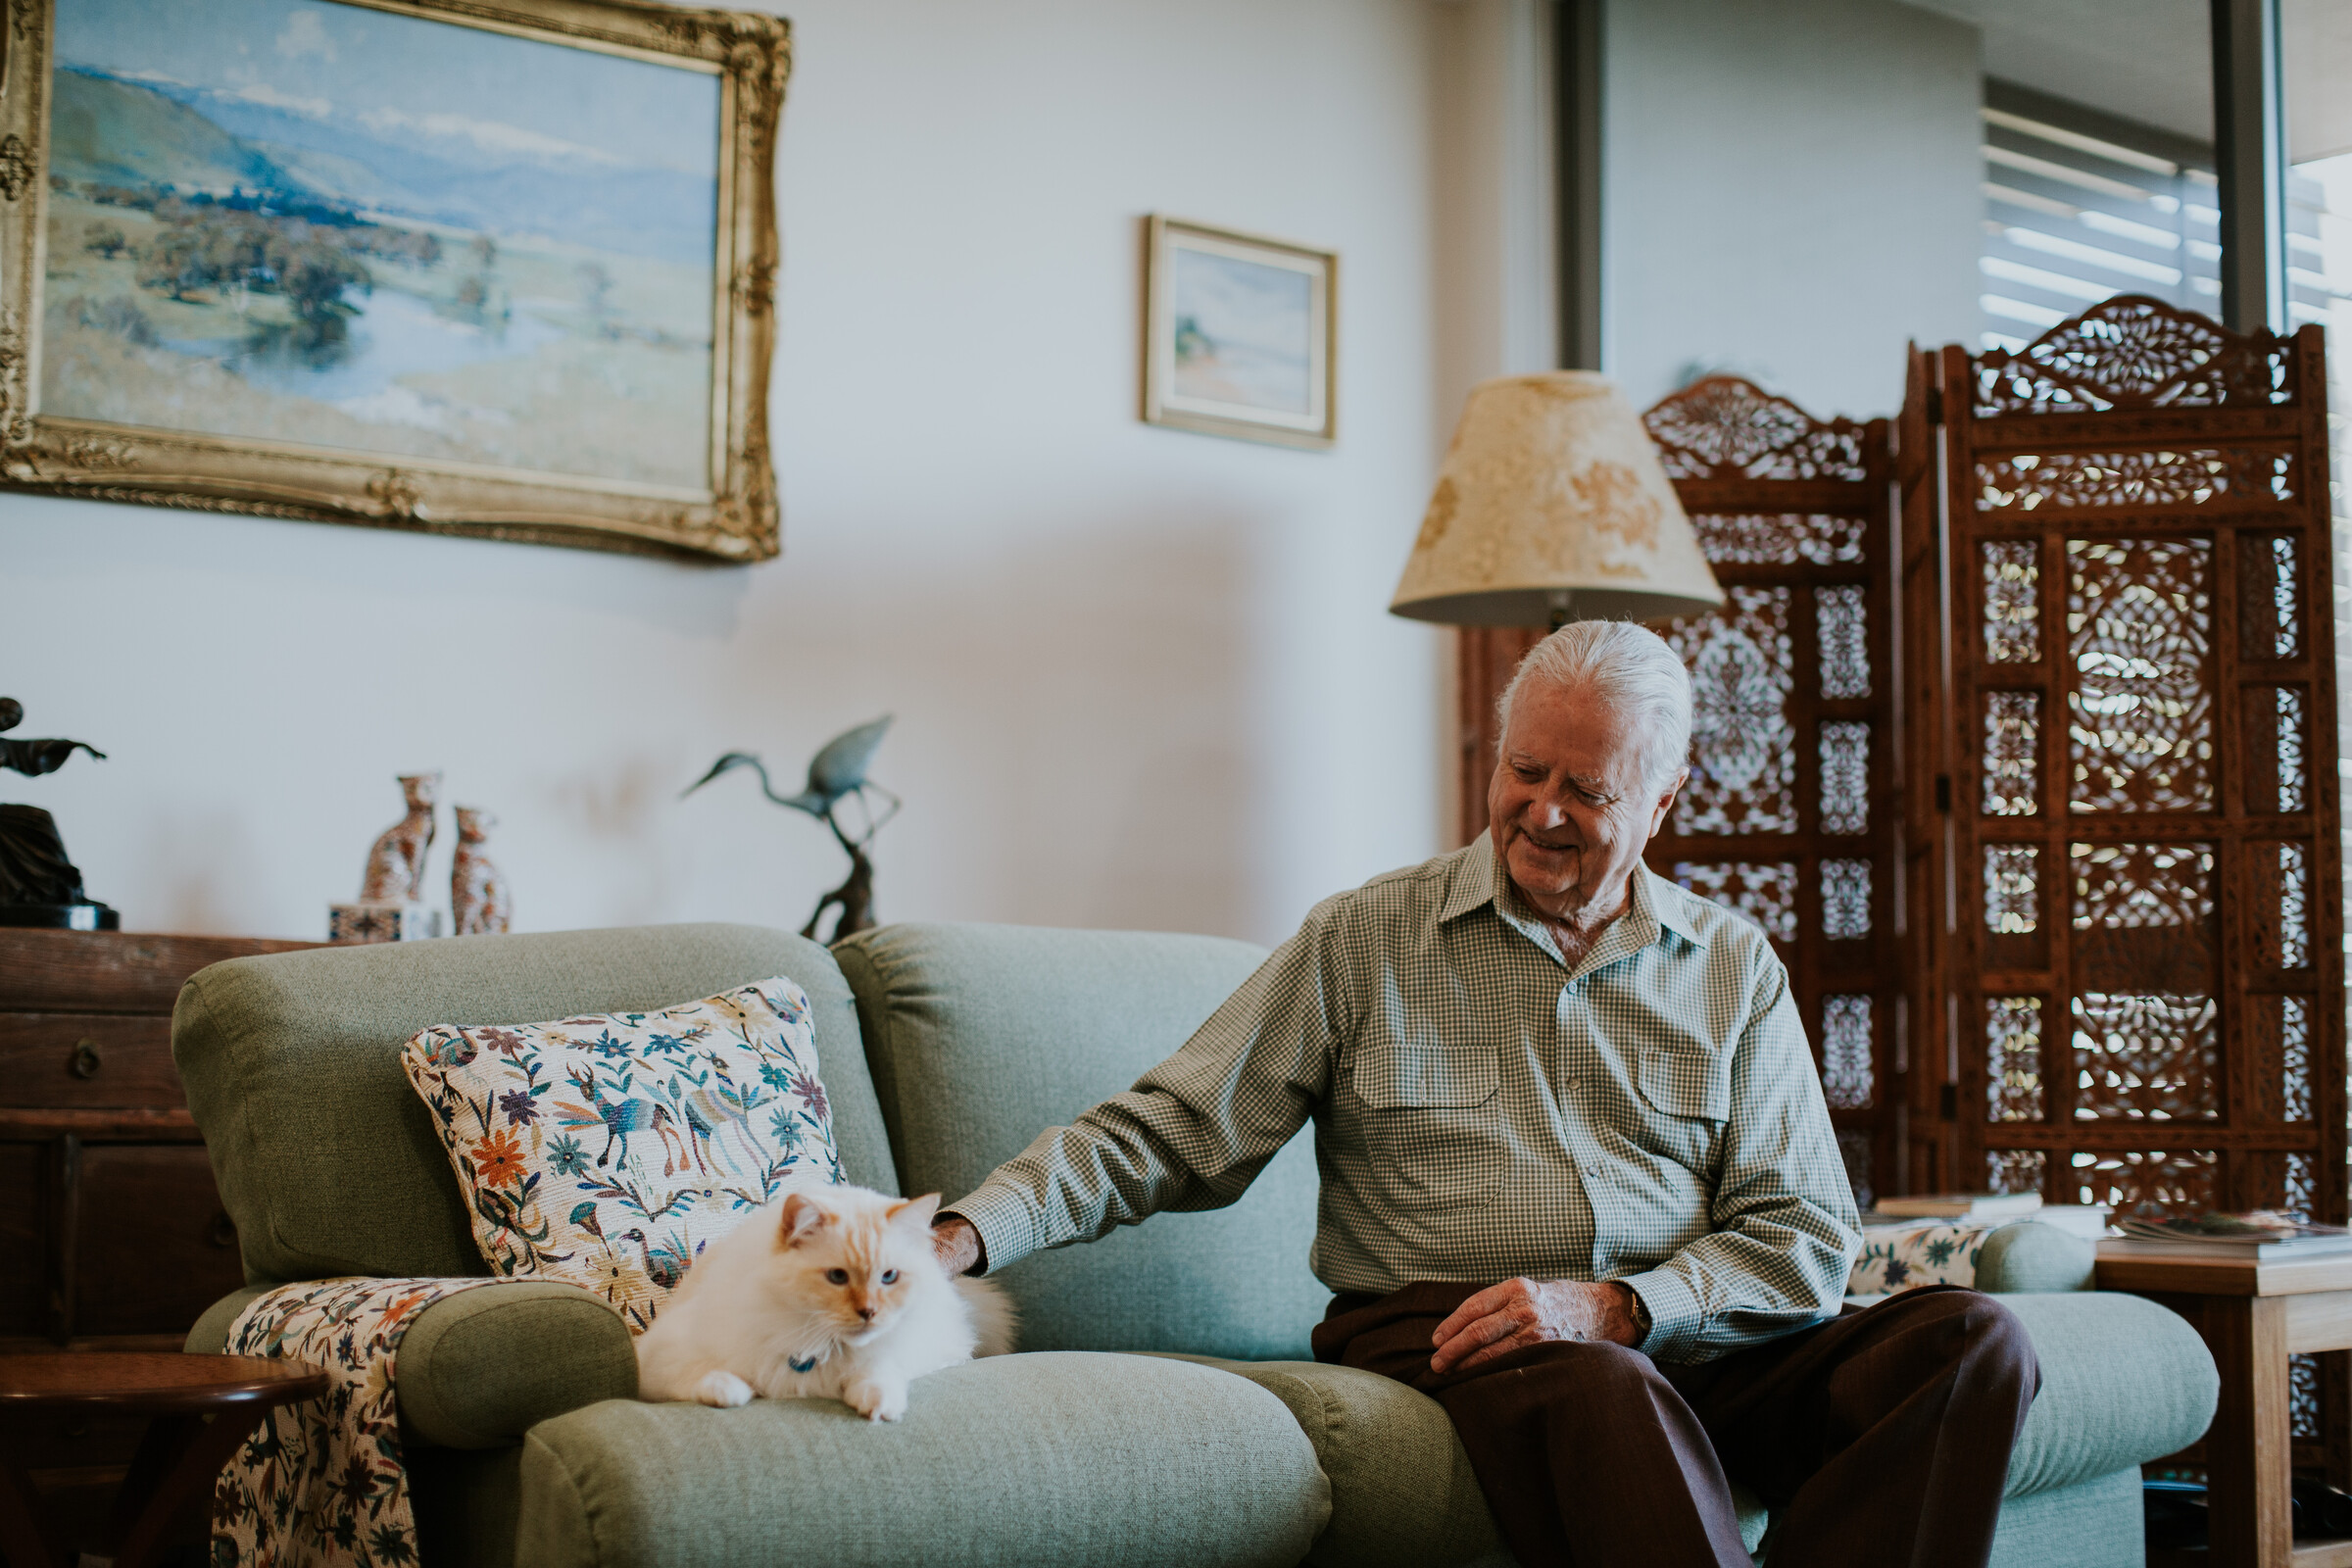 Senior man petting his cat on the couch in pet friendly environment